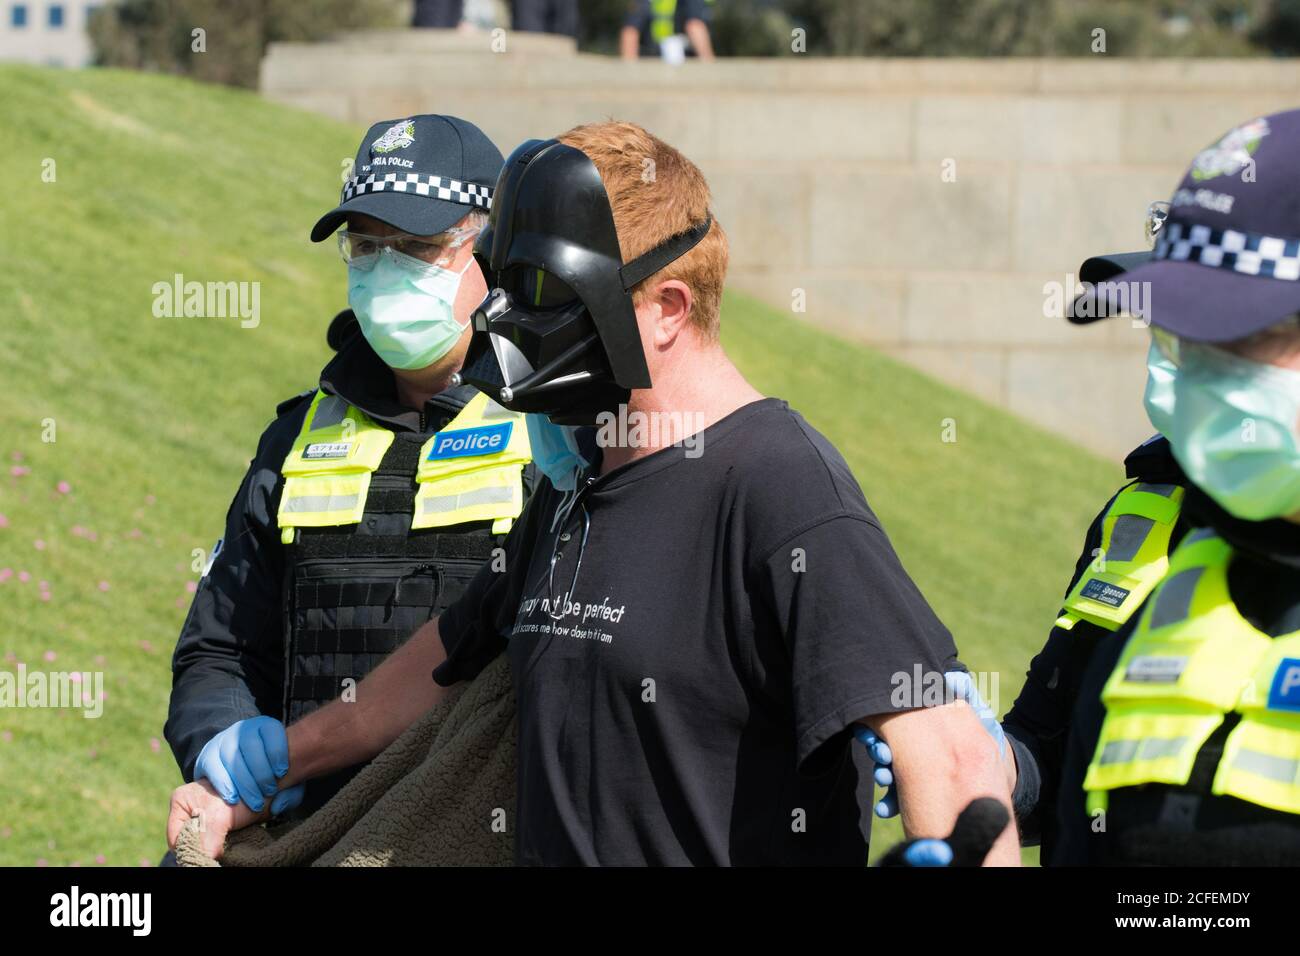 Melbourne, Australia 5 Sep 2020, a protestor in a Darth Vader mask is arrested by police at the Freedom Day Anti-mask and anti lockdown protest on the steps of the Shrine of Remembrance in Melbourne Australia. Credit: Michael Currie/Alamy Live News Stock Photo